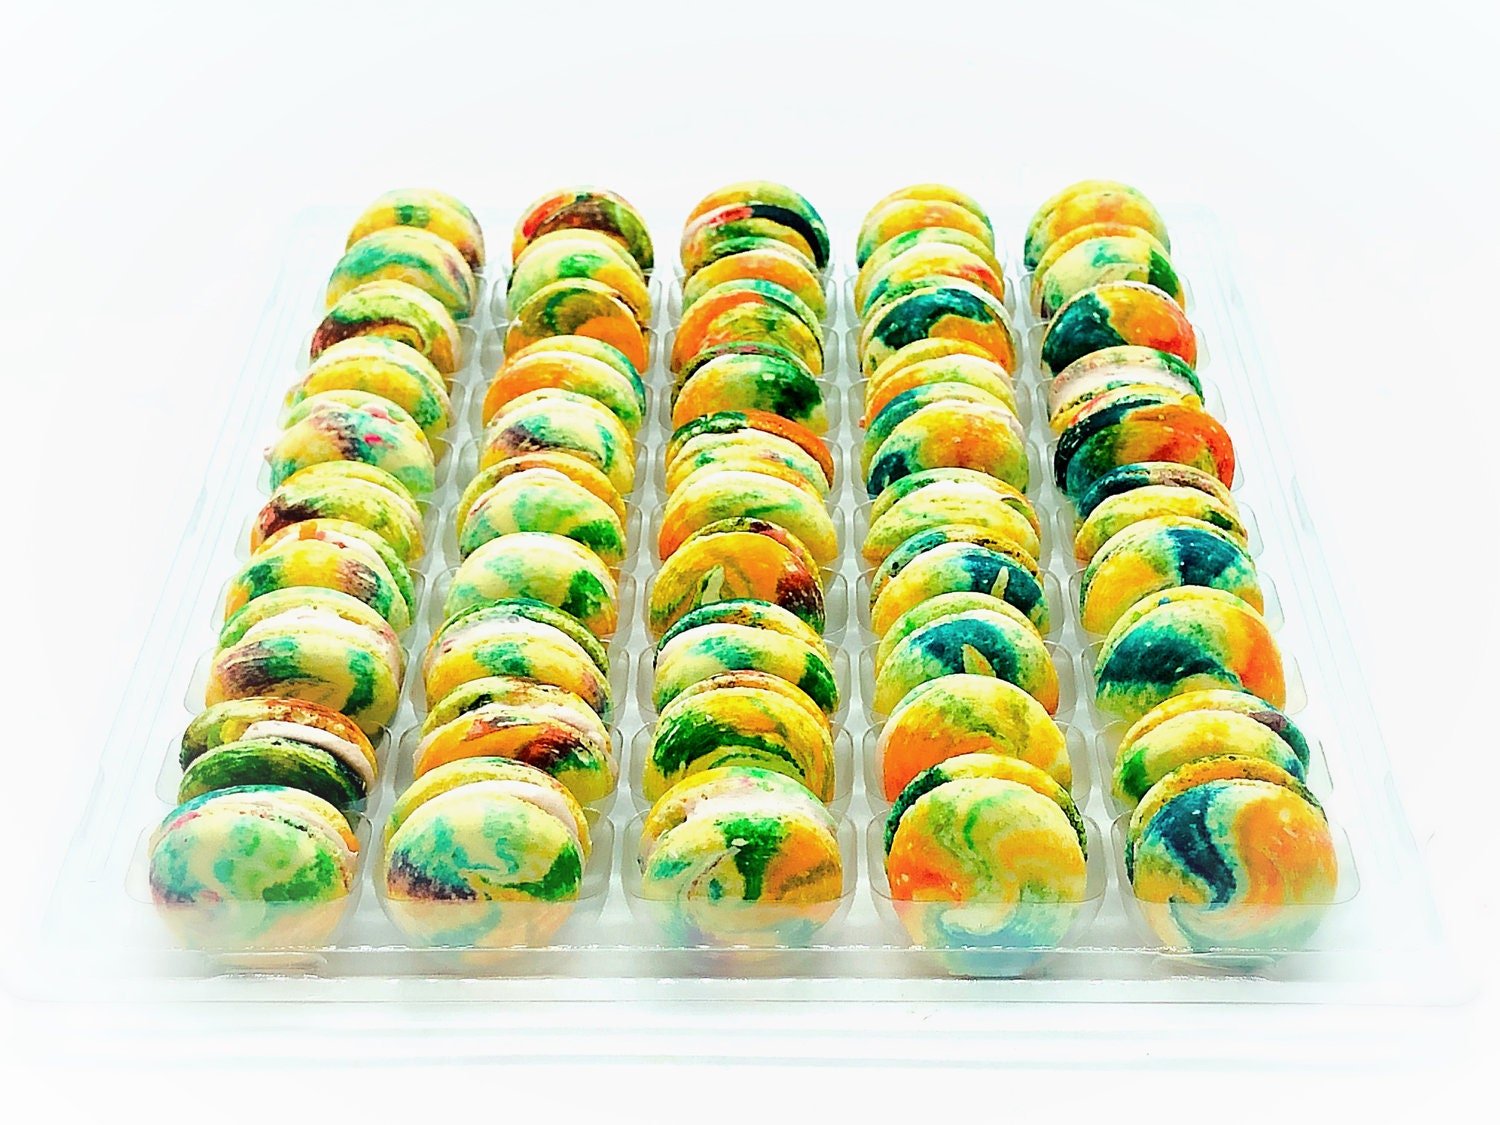 50 Pack Fruity Pebble French Macaron Value Pack - Macaron Centrale